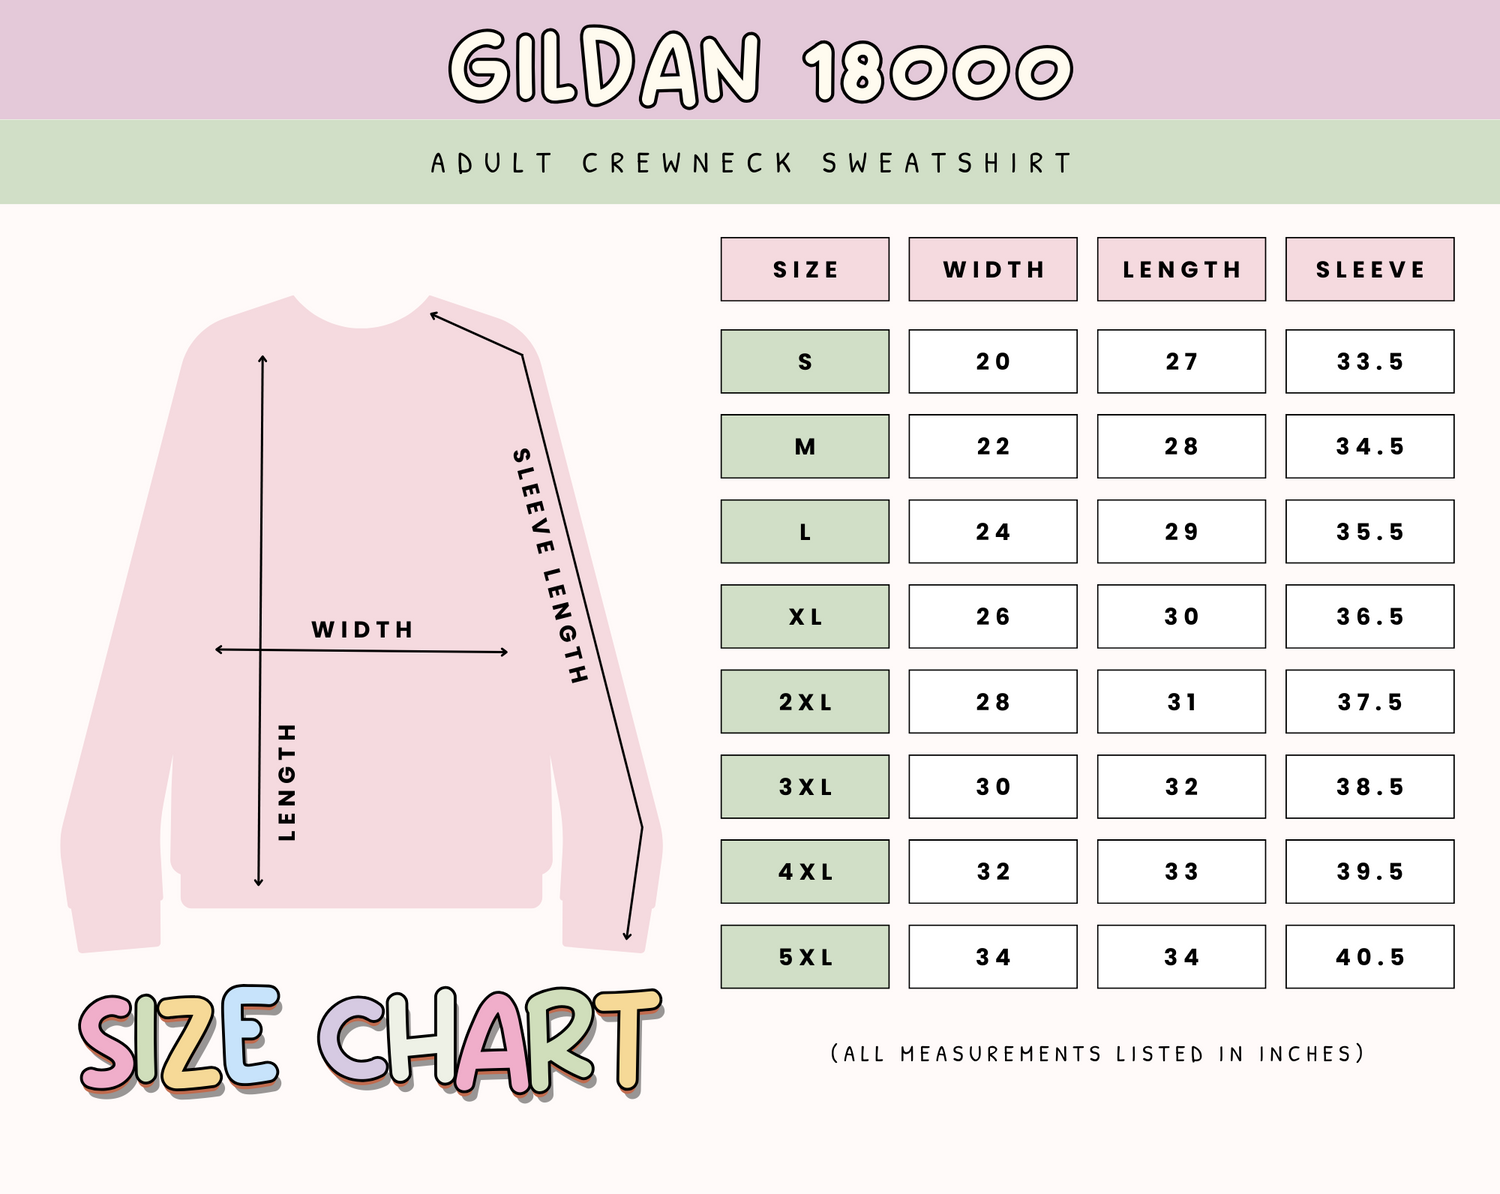 Table and illustration showing a size guide for crew neck sweatshirts